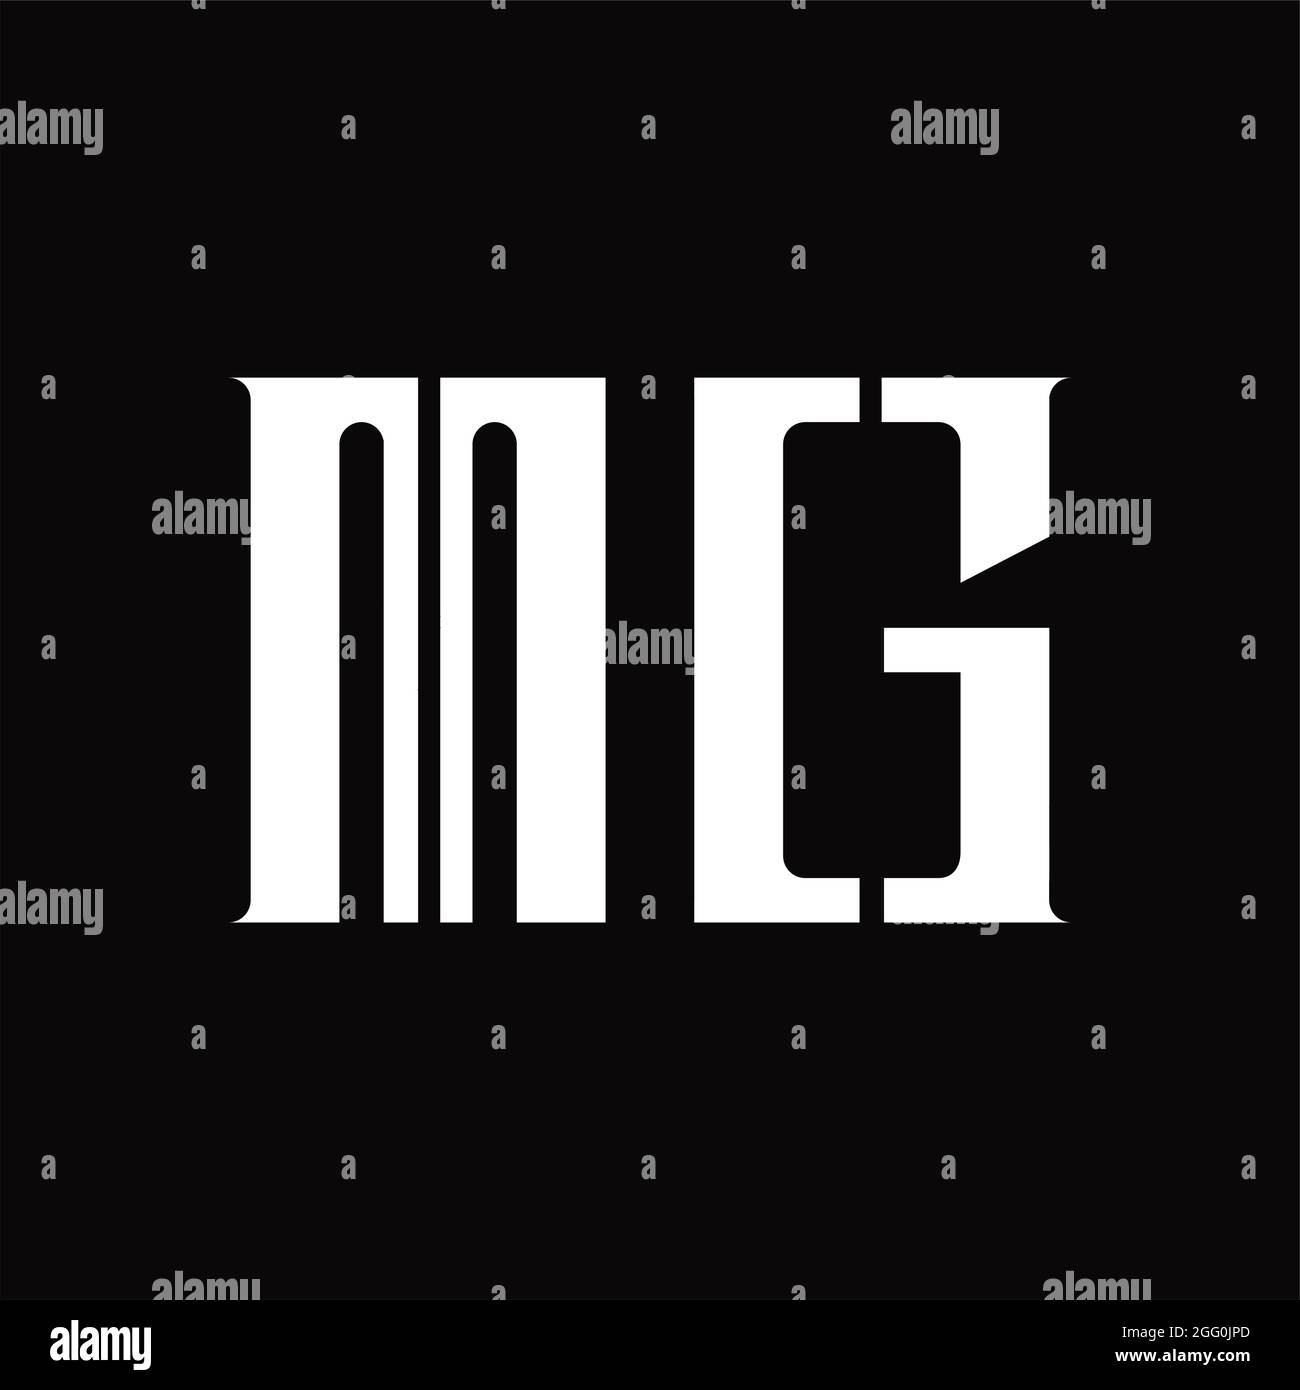 MG Logo monogram drops crown abstract shape vector images design template  Stock Photo - Alamy